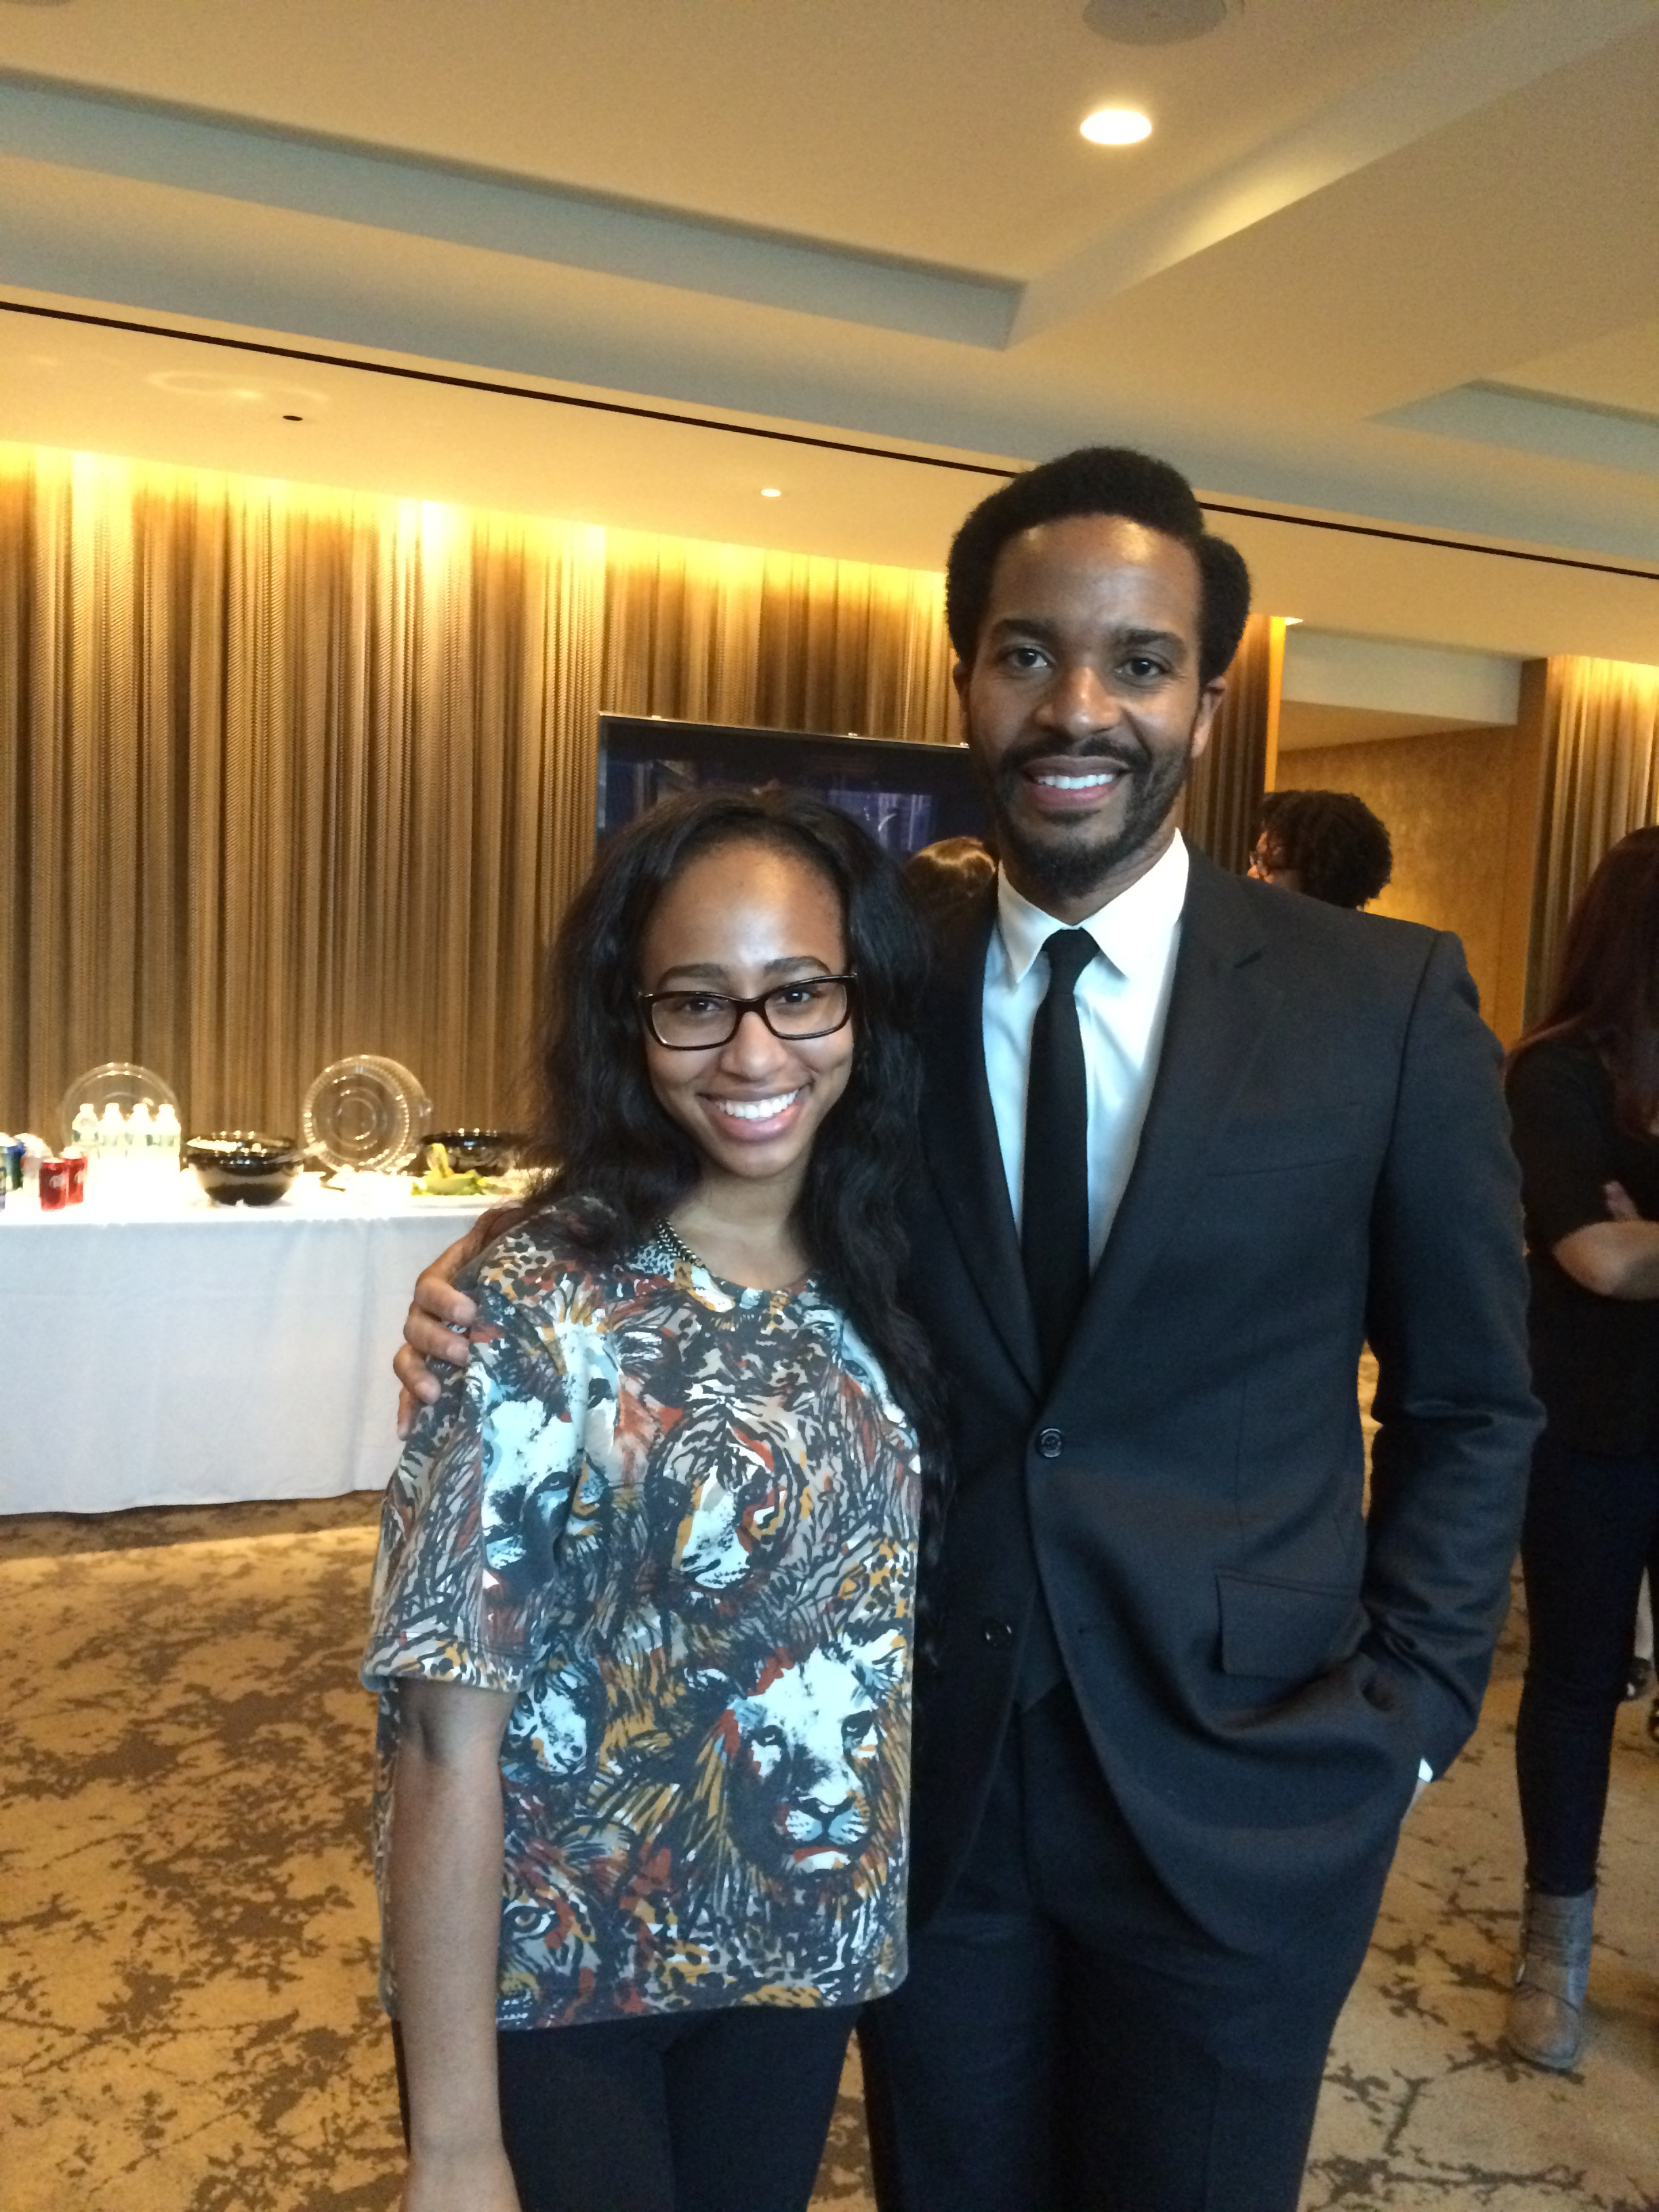 Tamara Hall with Andre Holland (from Cinemax's (and HBO company) "The Knick" 